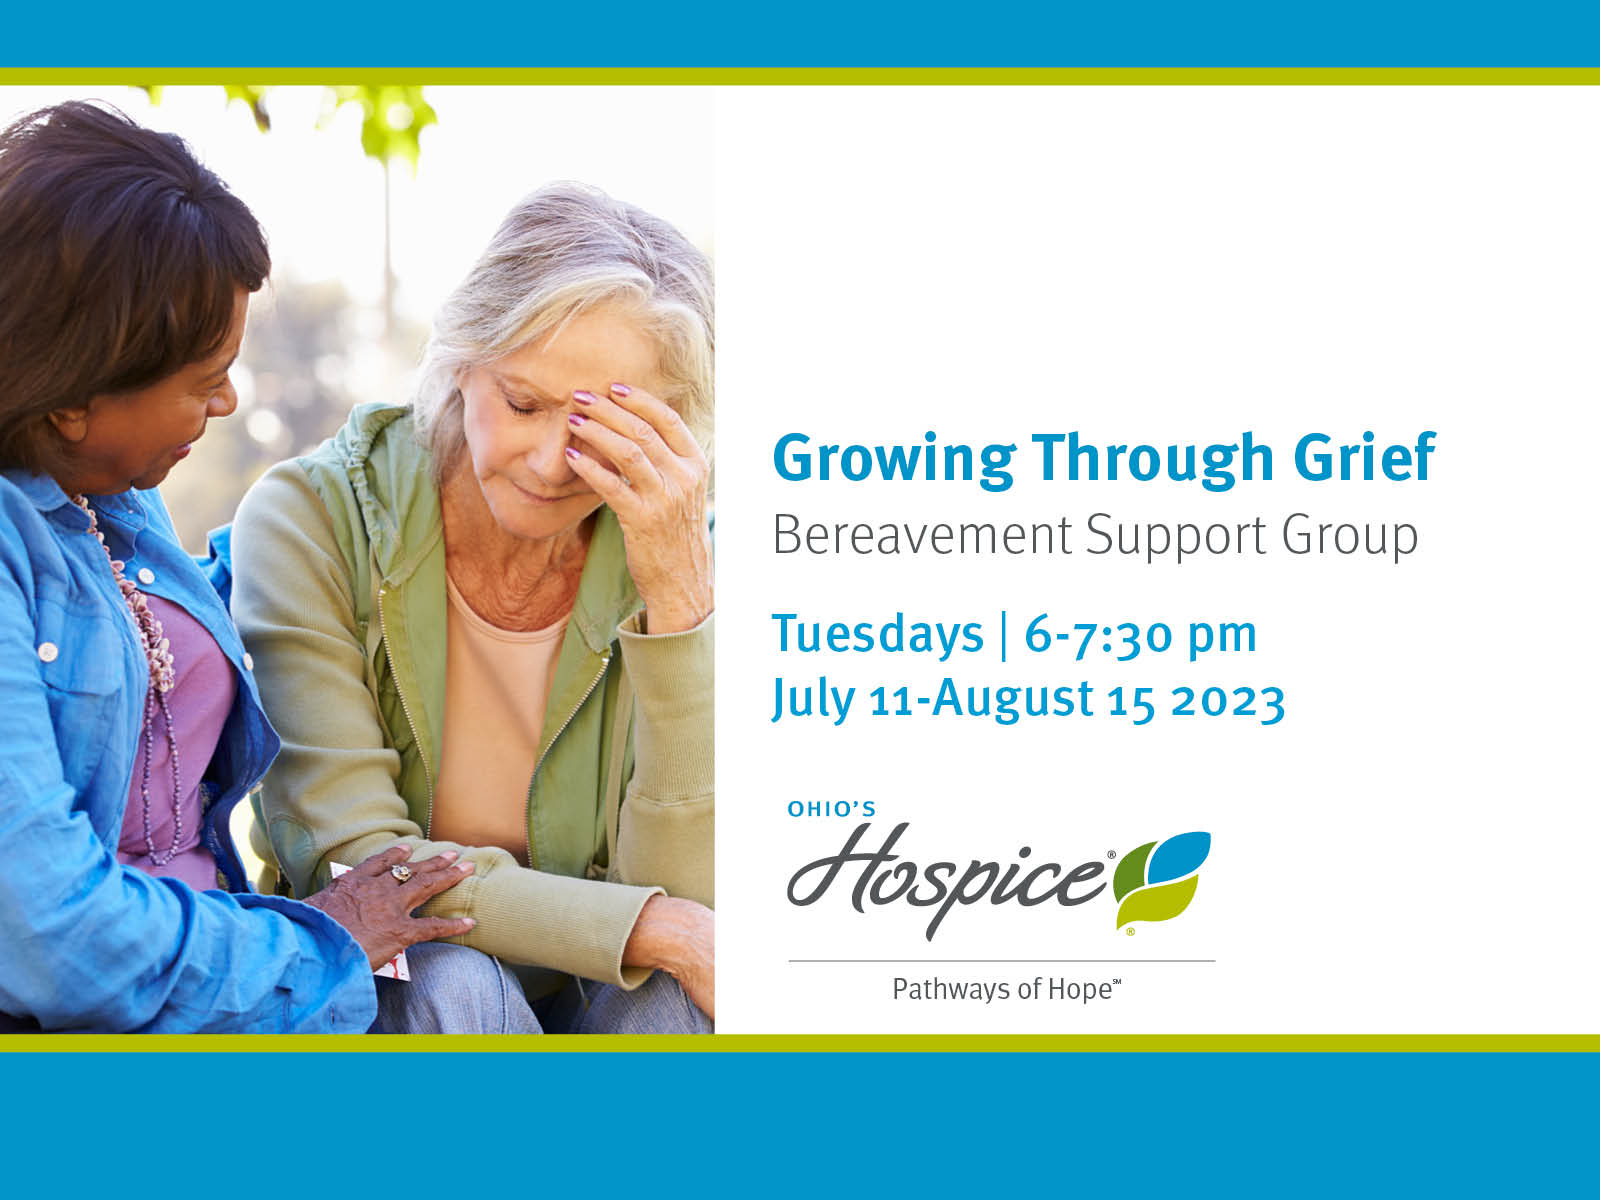 Growing Through Grief. Bereavement Support Group. Tuesdays | 6-7:30 pm. July 11-August 15, 2023